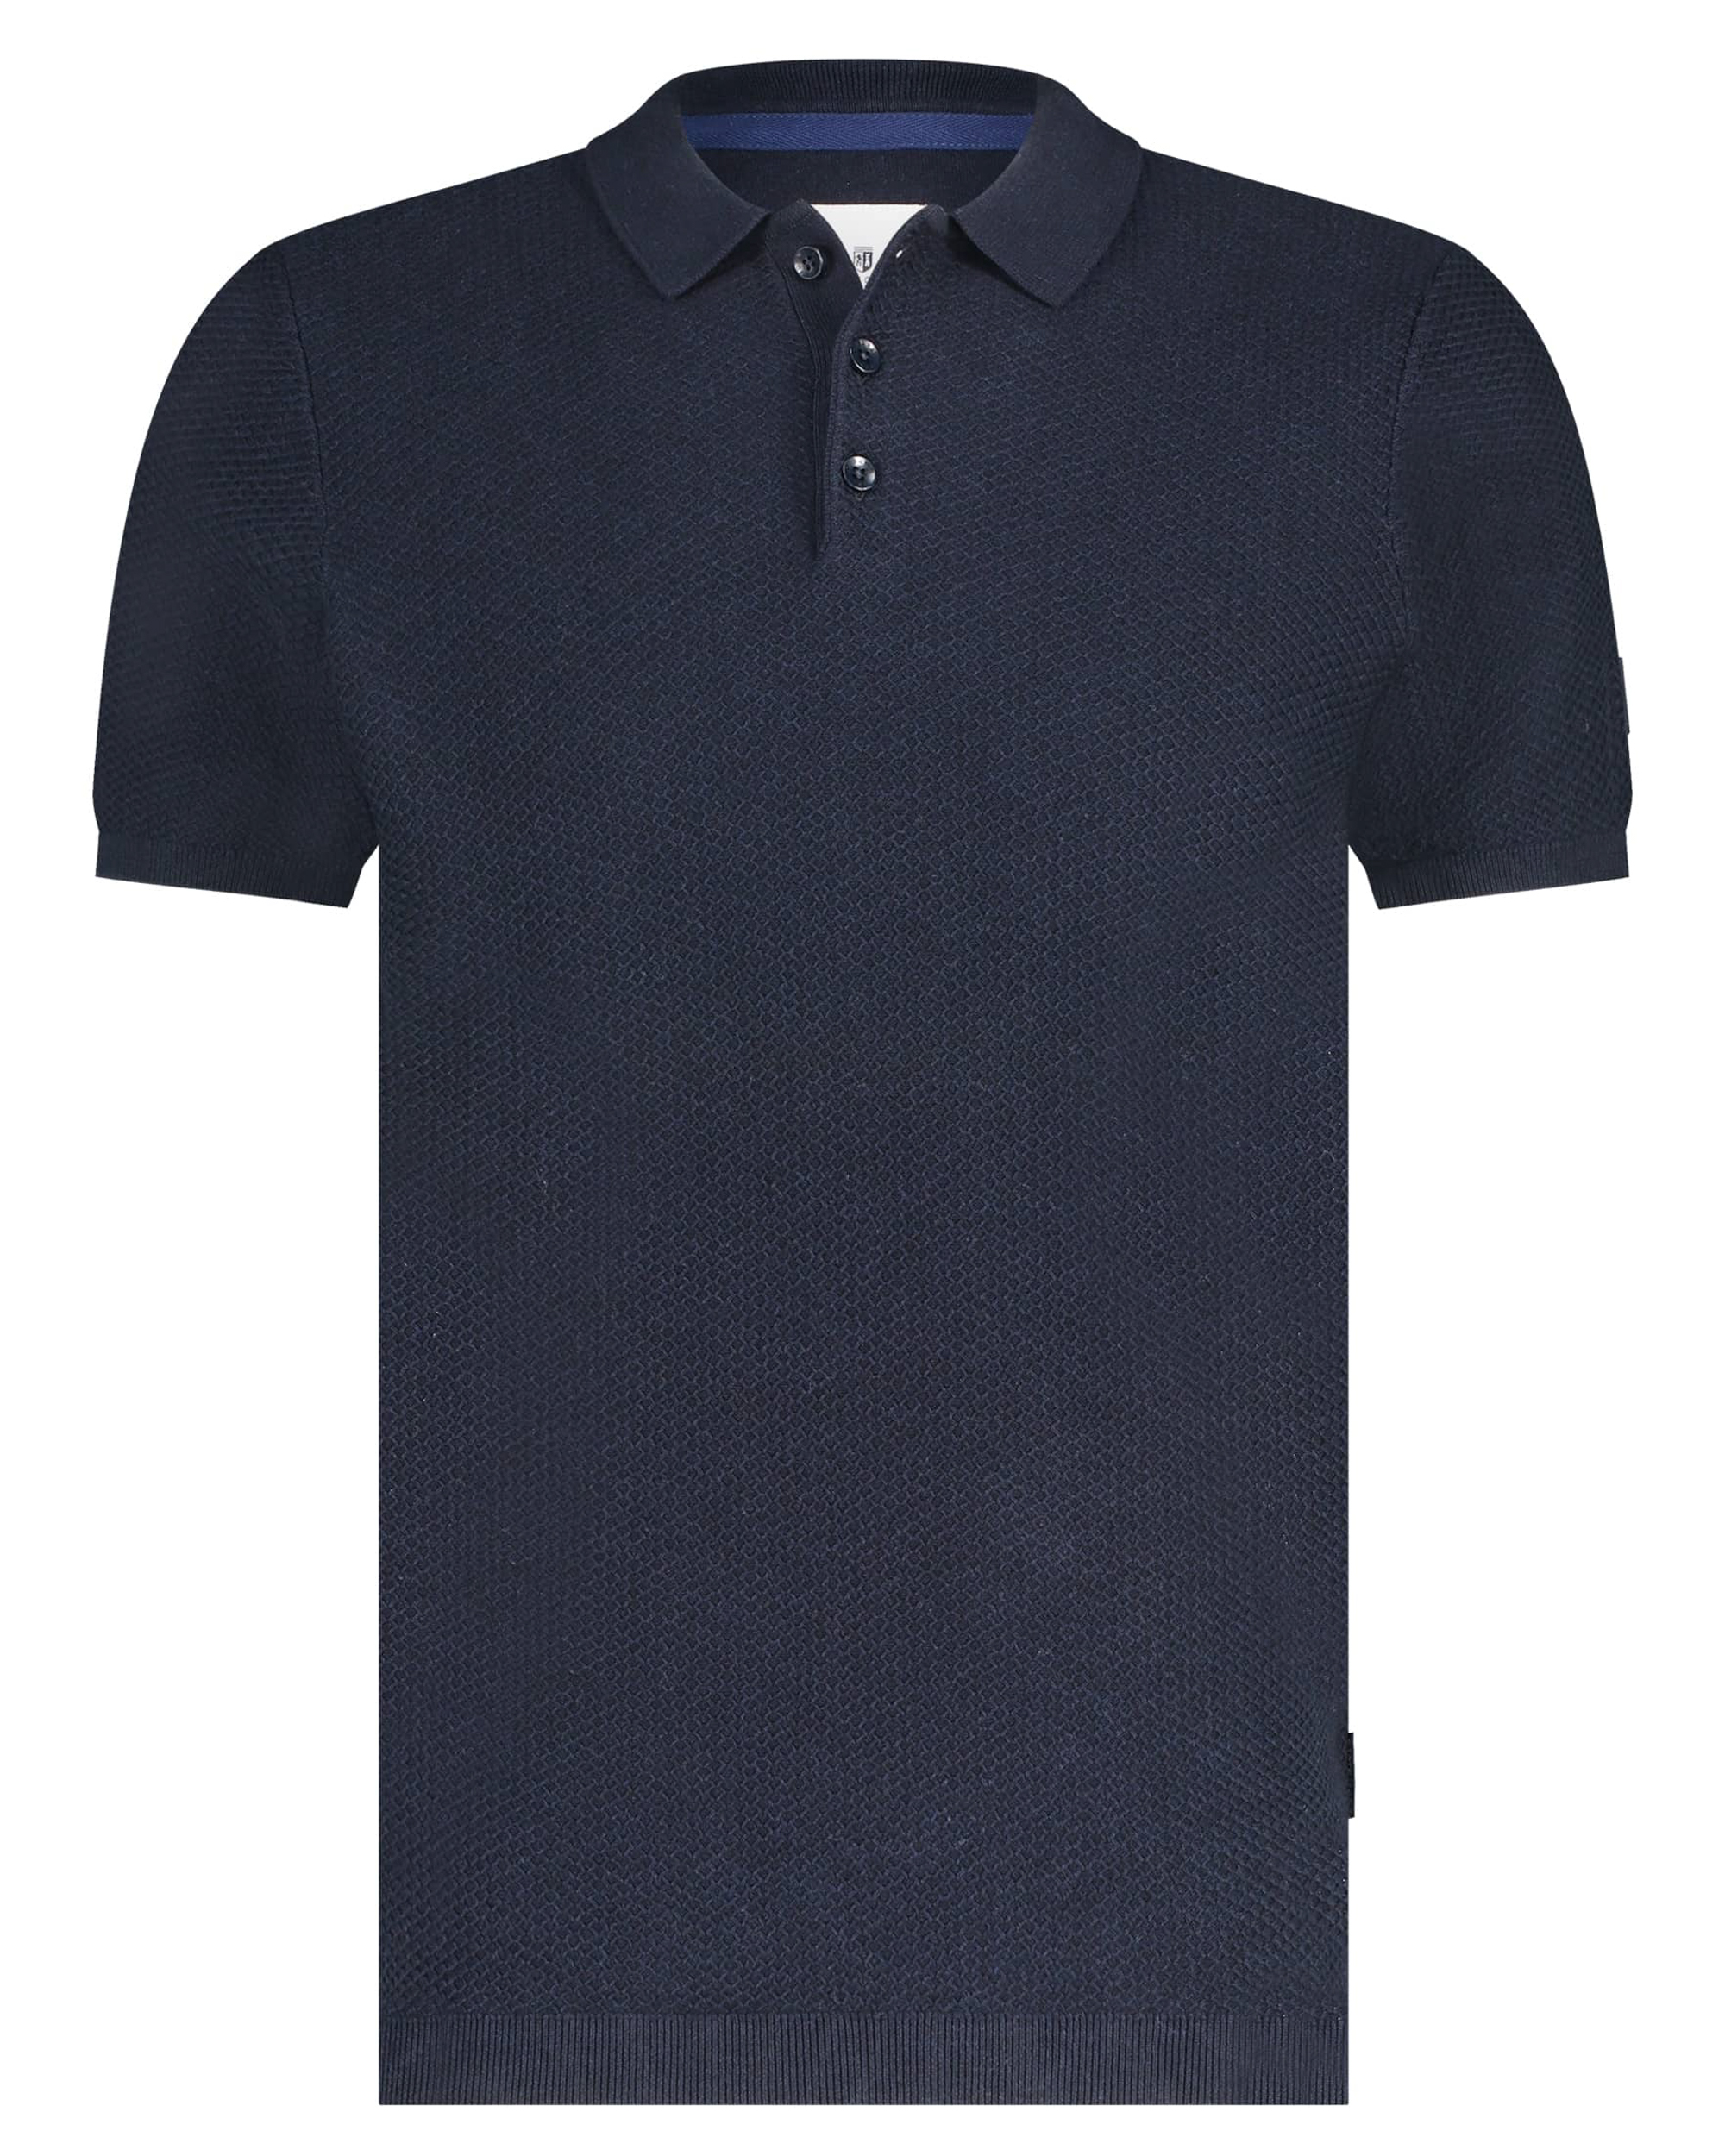 State of Art Knitted Poloshirt Navy